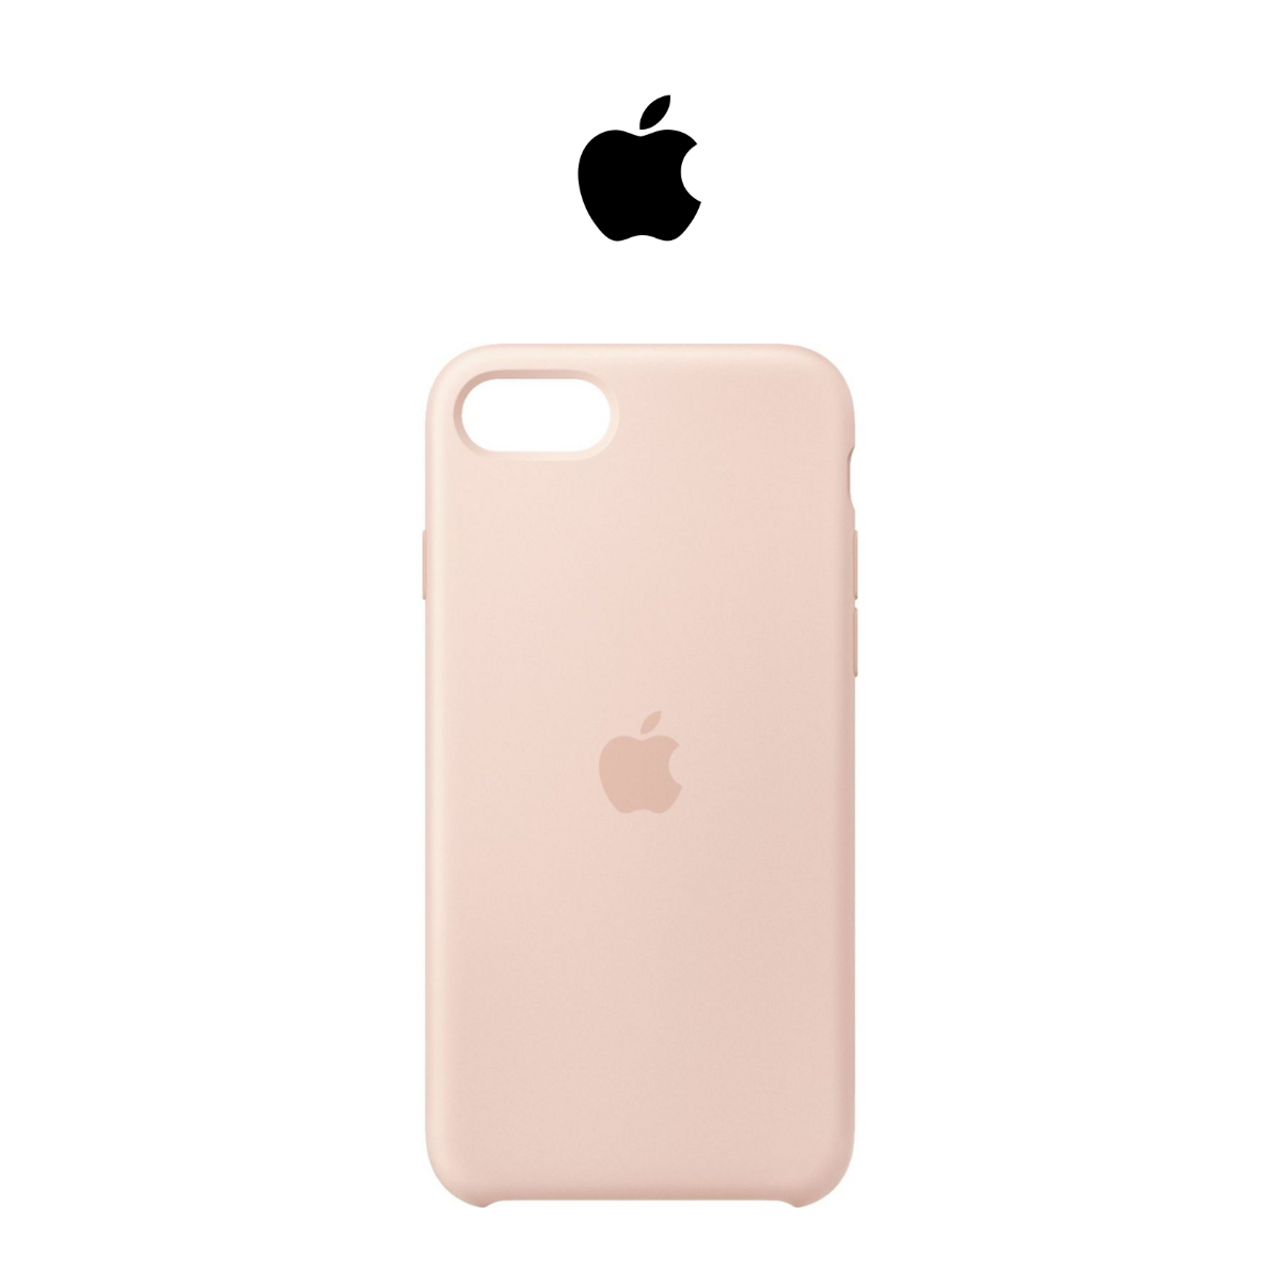 Apple iPhone SE Silicone Case (MXYK2ZM/A) product image